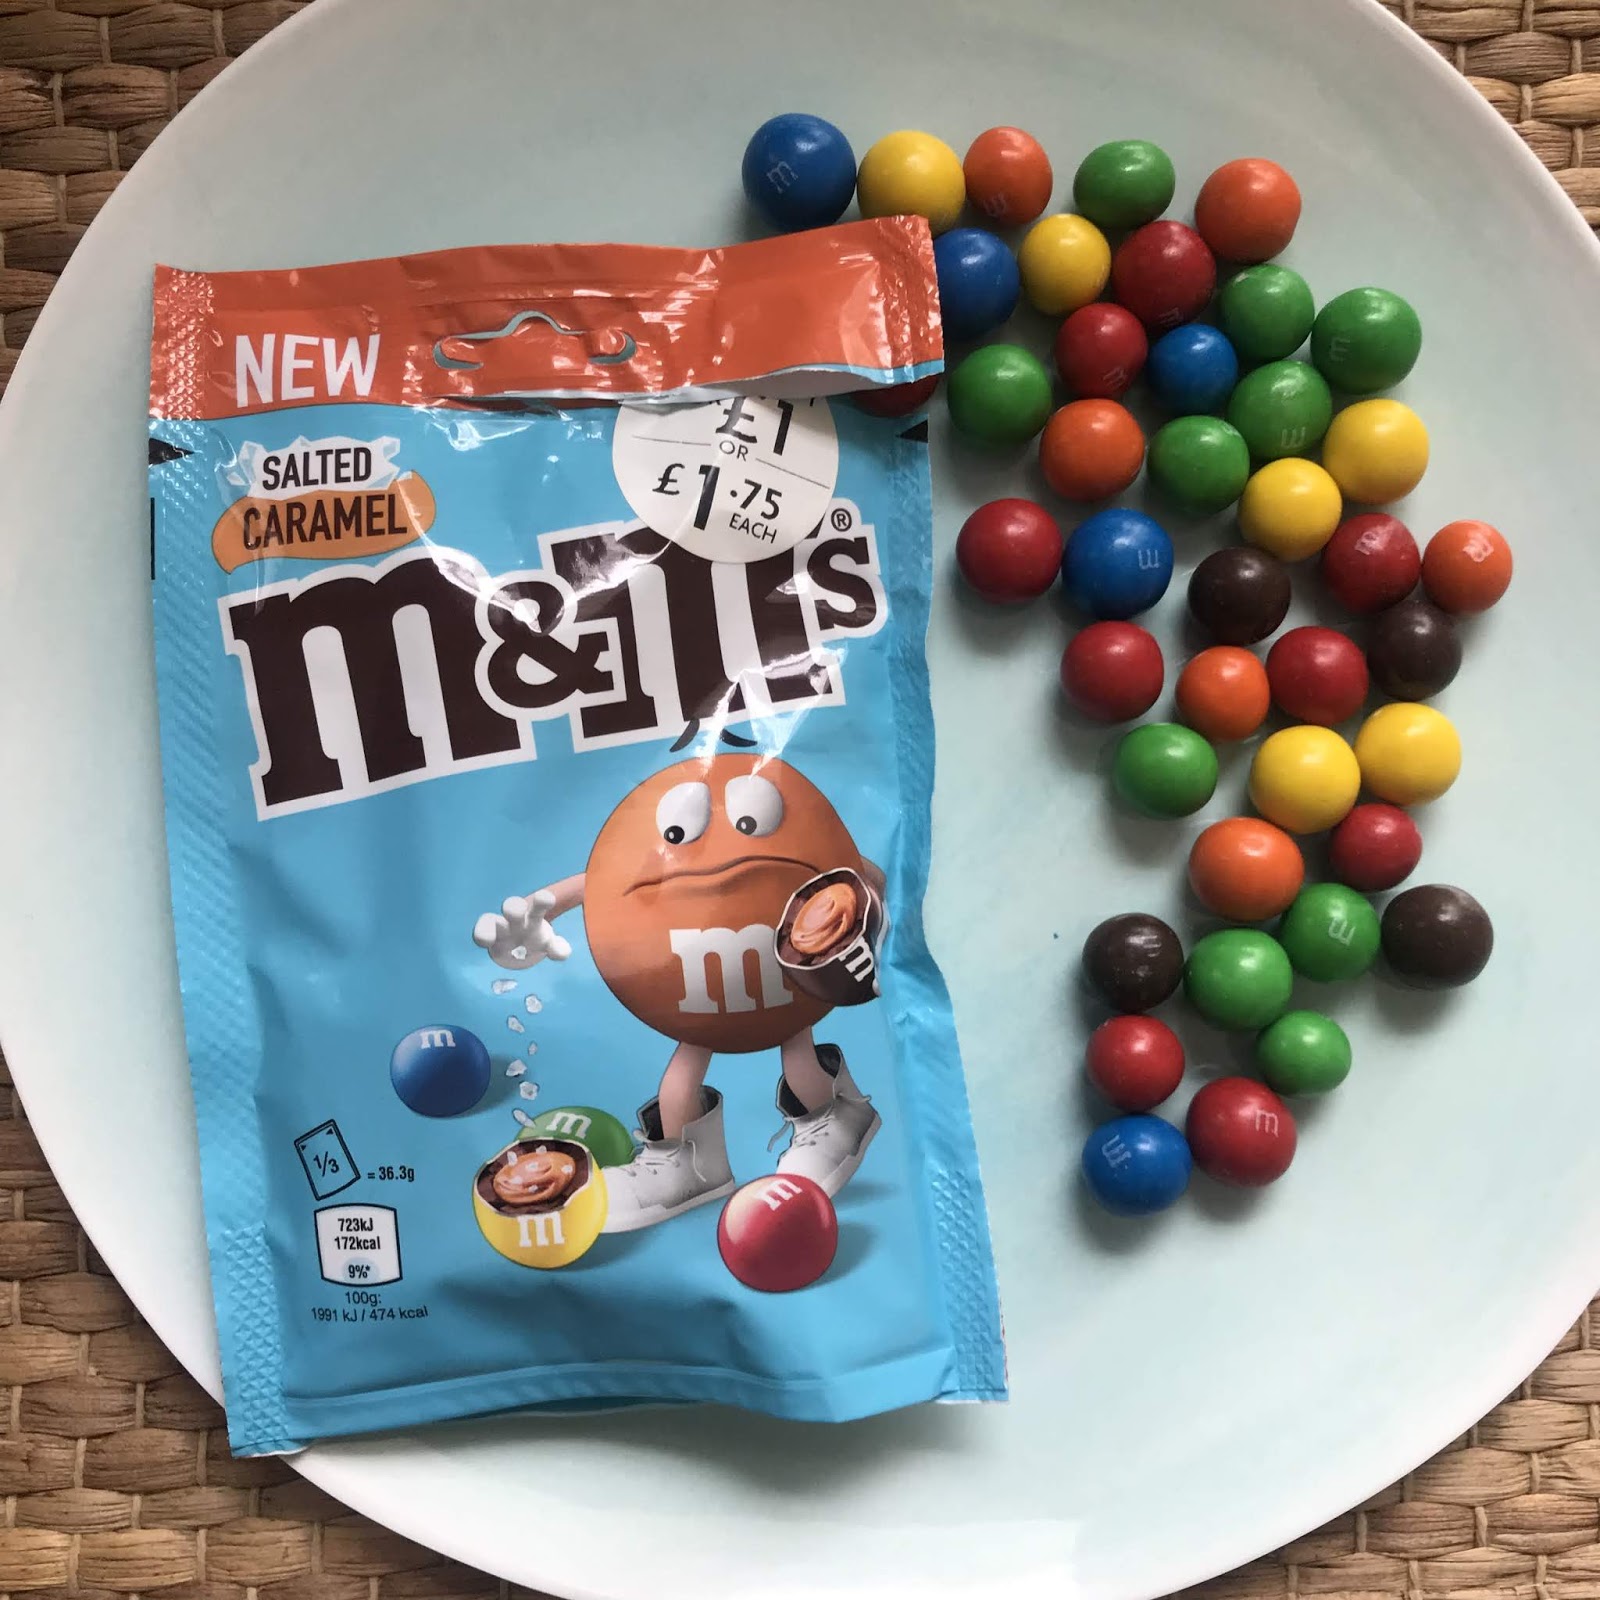 Packet of salted caramel M&Ms sweets candies opened with contents